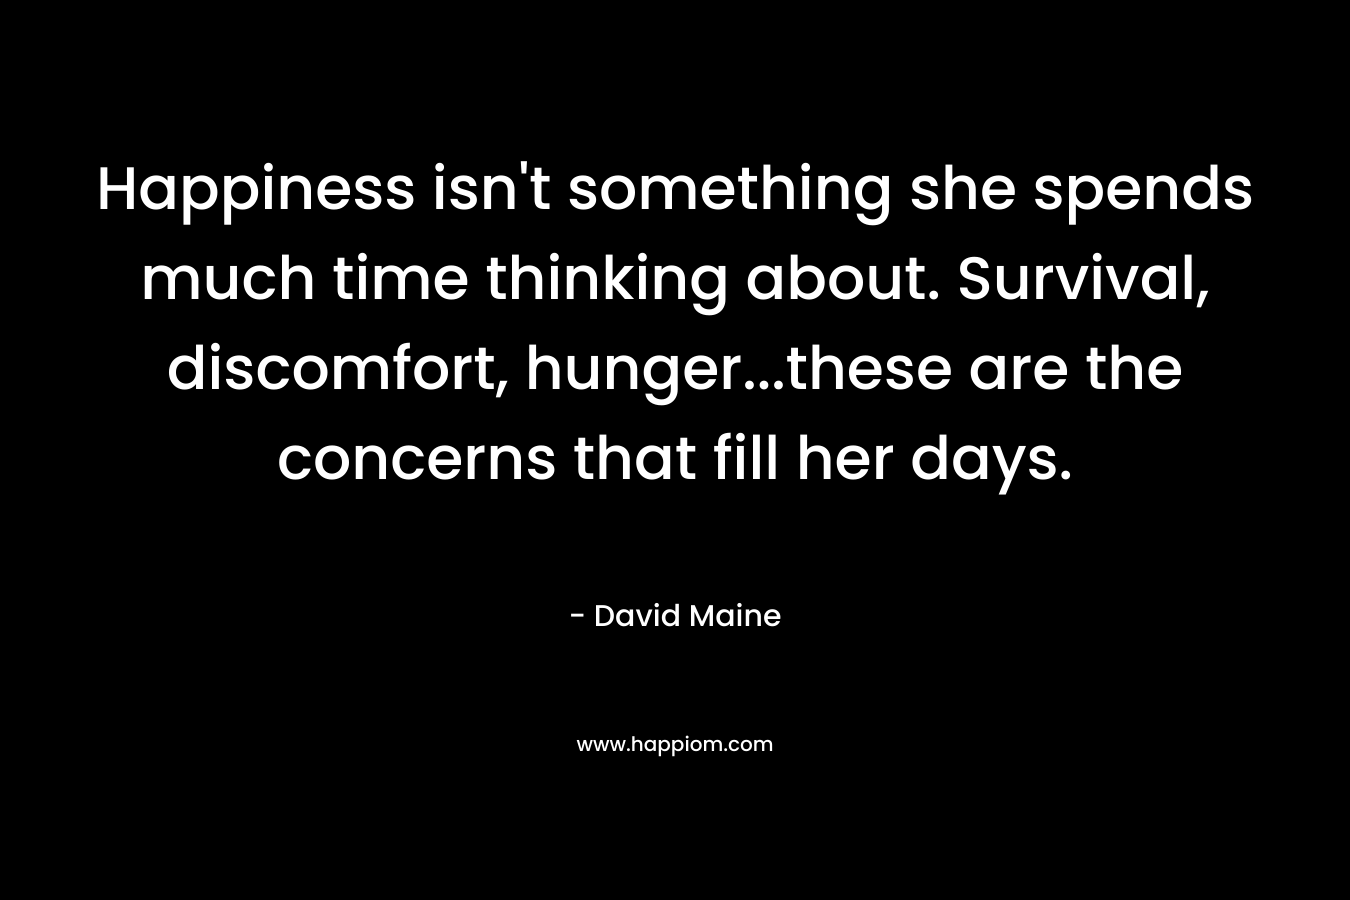 Happiness isn't something she spends much time thinking about. Survival, discomfort, hunger...these are the concerns that fill her days.